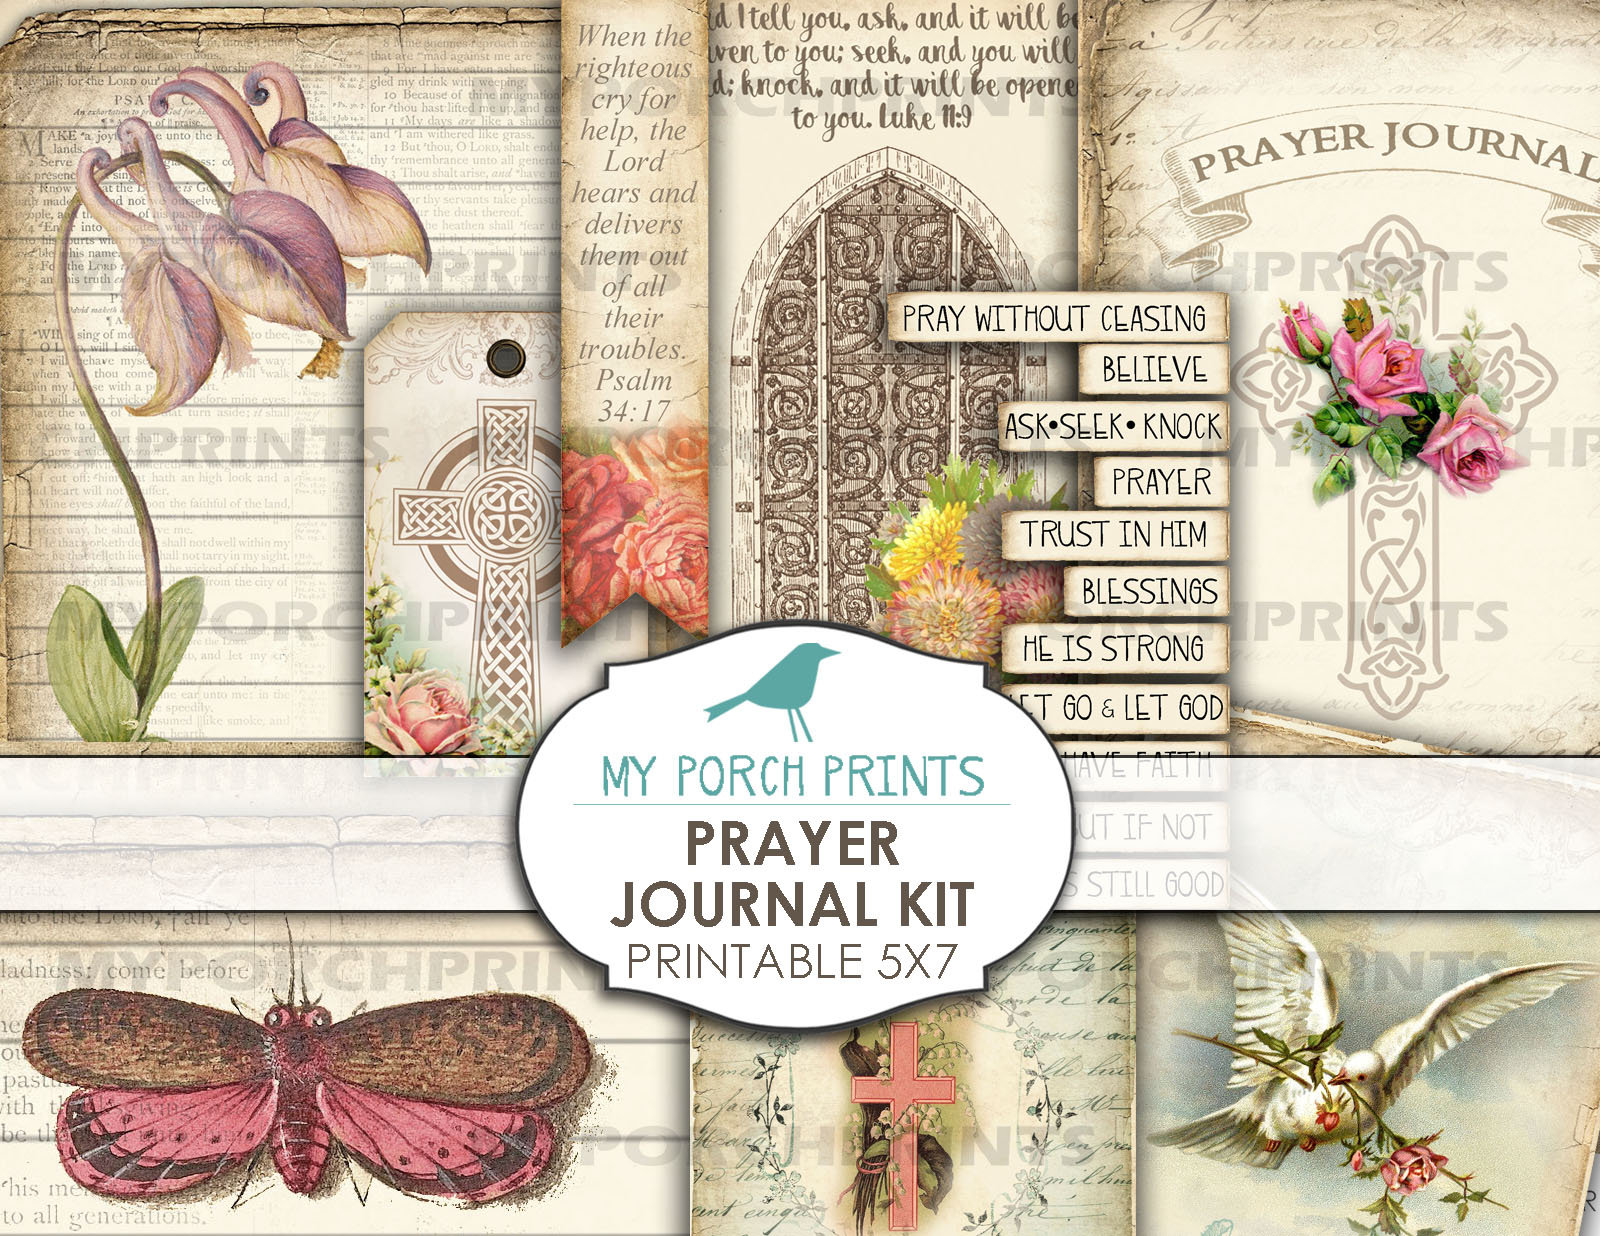 How to store mixed media collage photo elements (without going nuts) -  Digital Junk Journals